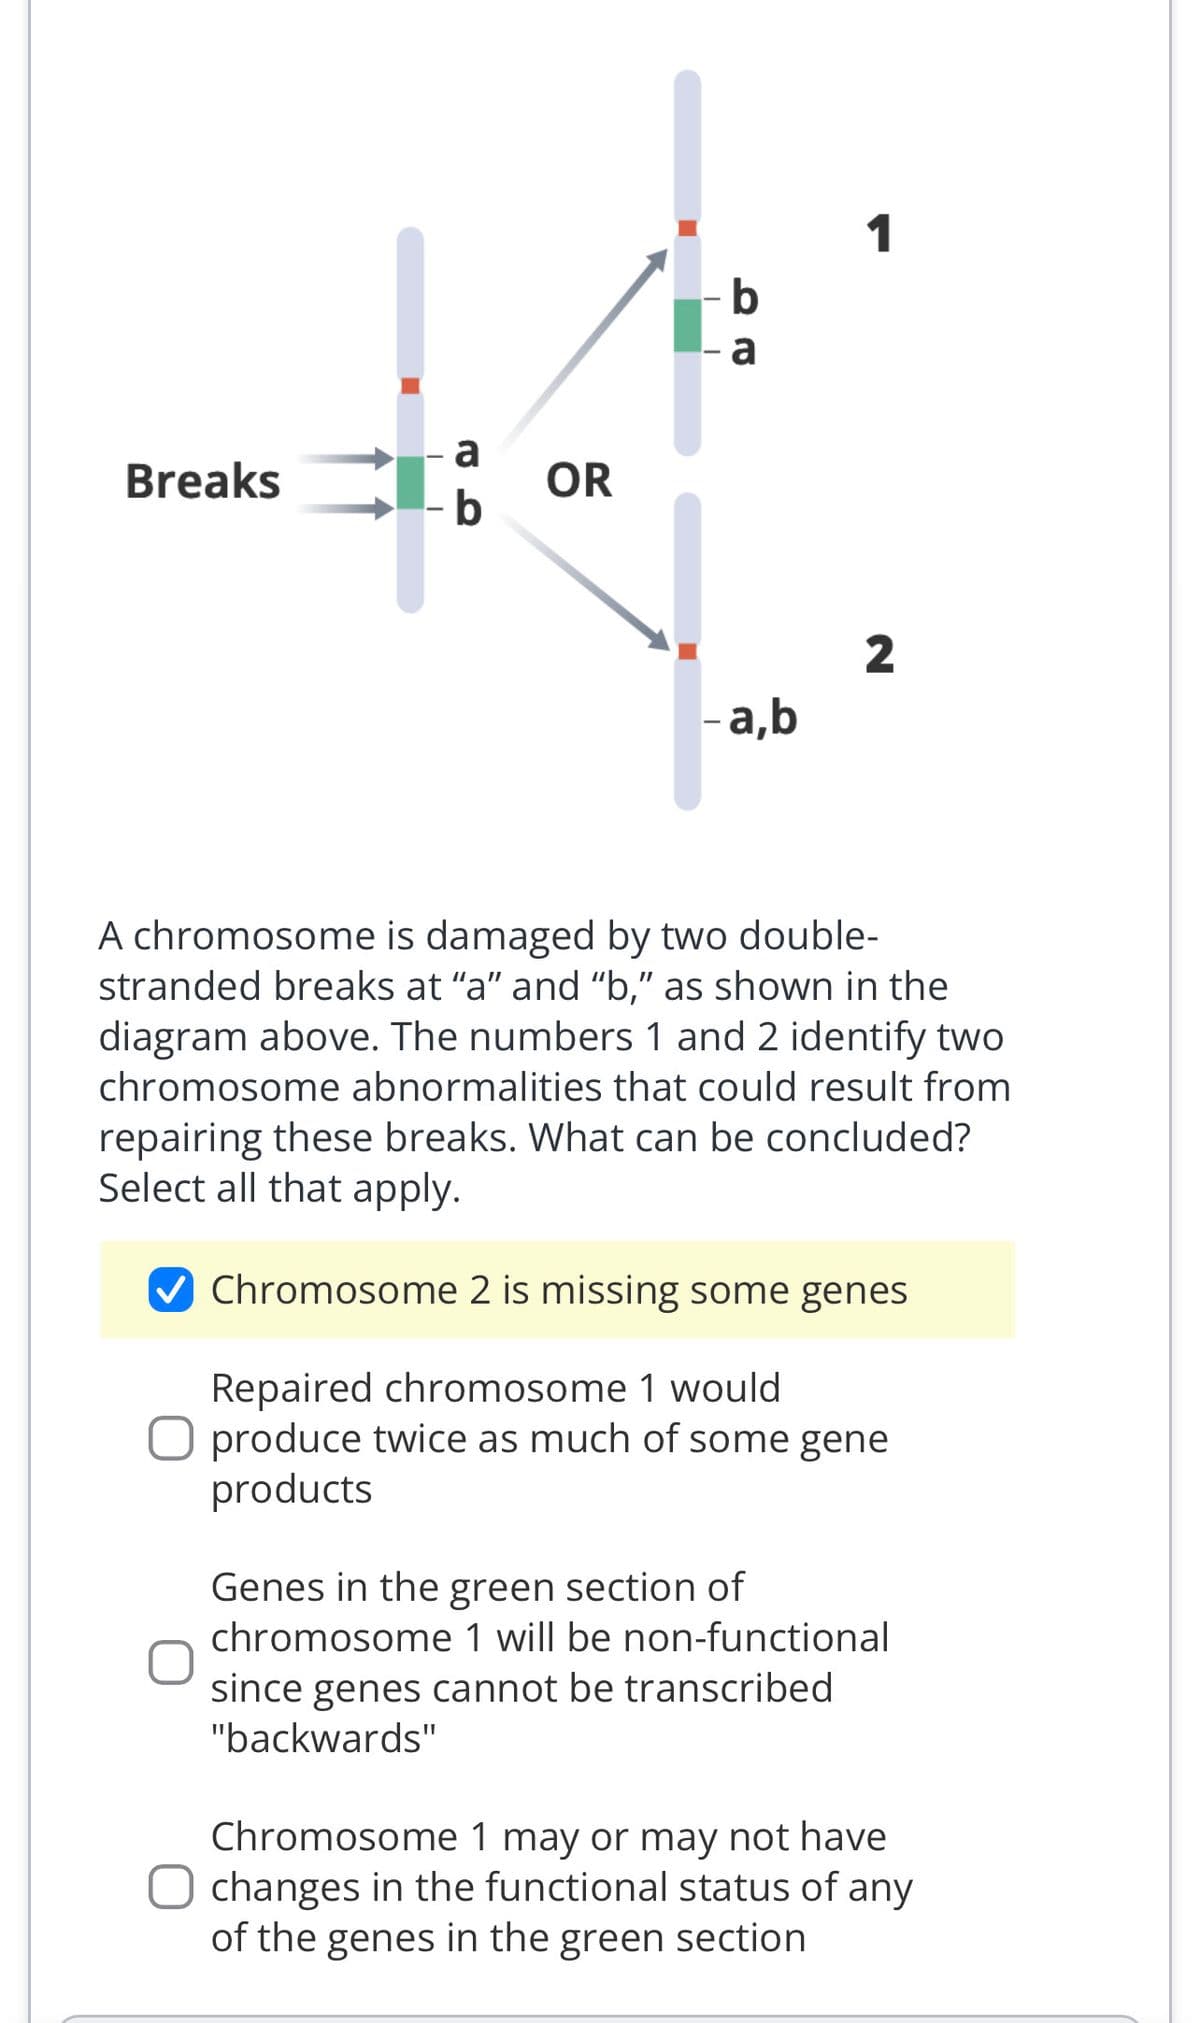 Breaks
a
- b
OR
- b
e0
- a,b
1
2
A chromosome is damaged by two double-
stranded breaks at "a" and "b," as shown in the
diagram above. The numbers 1 and 2 identify two
chromosome abnormalities that could result from
repairing these breaks. What can be concluded?
Select all that apply.
✔Chromosome 2 is missing some genes
Repaired chromosome 1 would
O produce twice as much of some gene
products
Genes in the green section of
chromosome 1 will be non-functional
since genes cannot be transcribed
"backwards"
Chromosome 1 may or may not have
changes in the functional status of any
of the genes in the green section